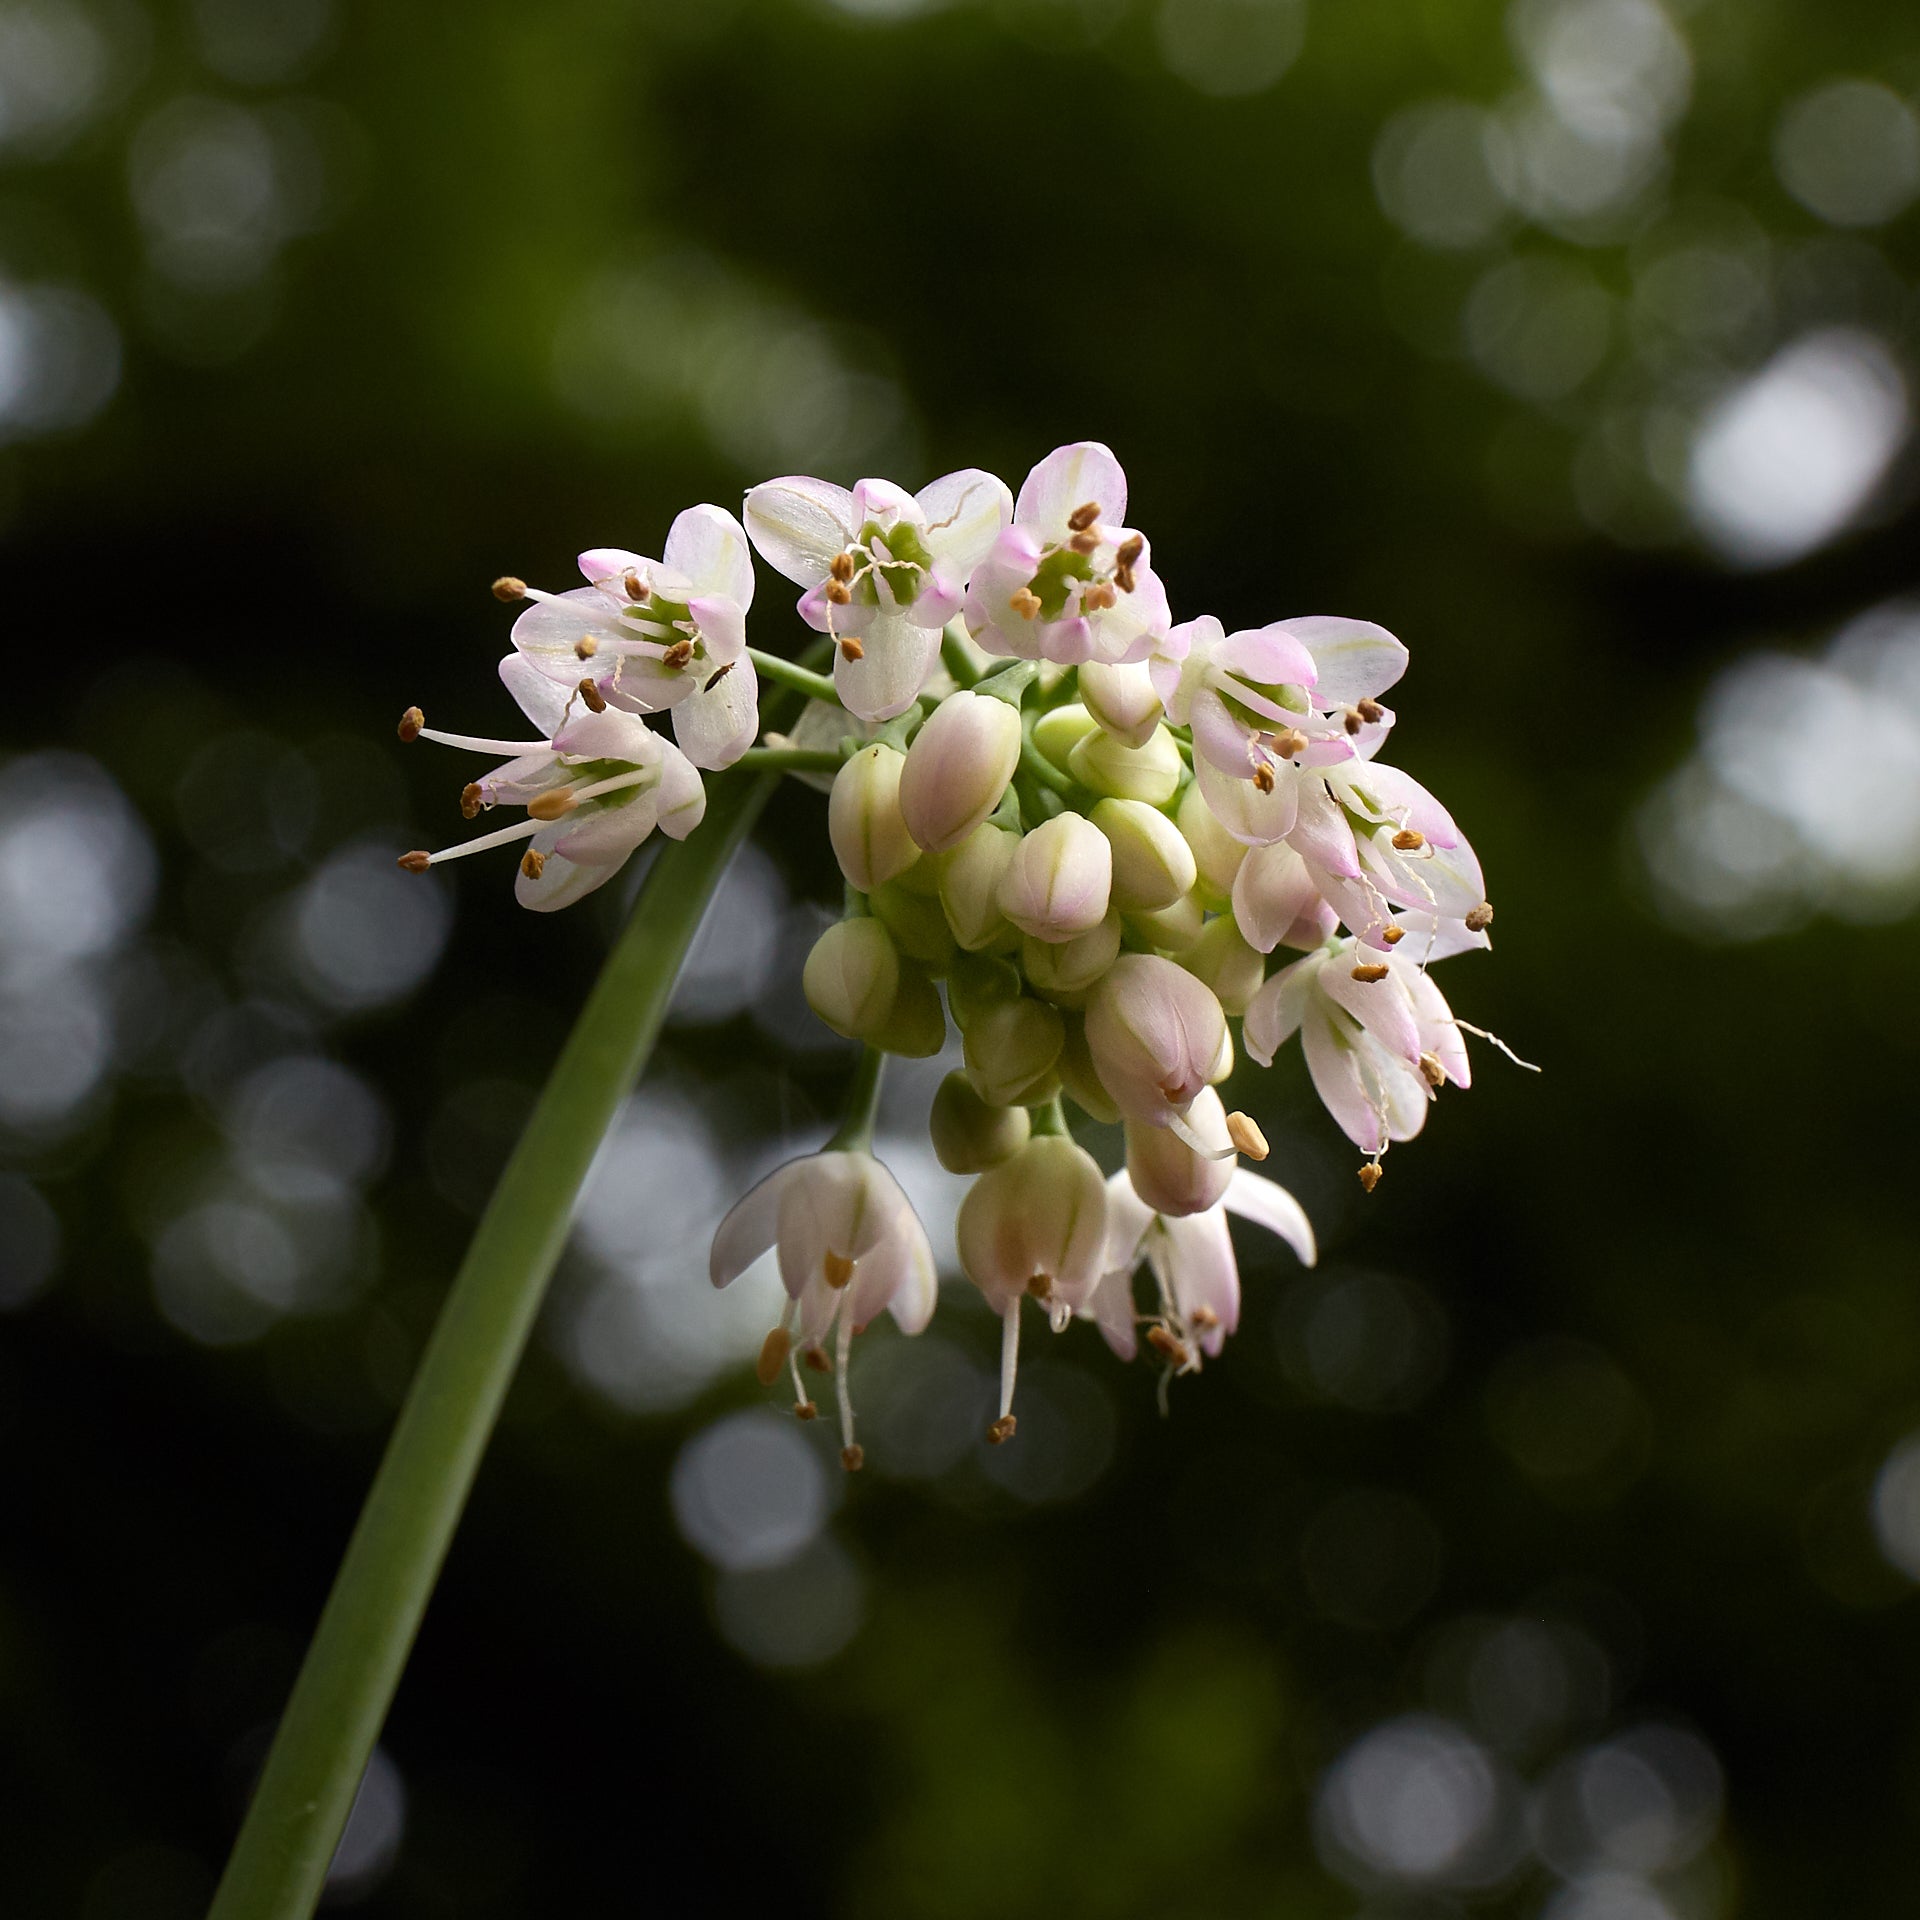 A cluster of white and pink flowers on a green stalk.